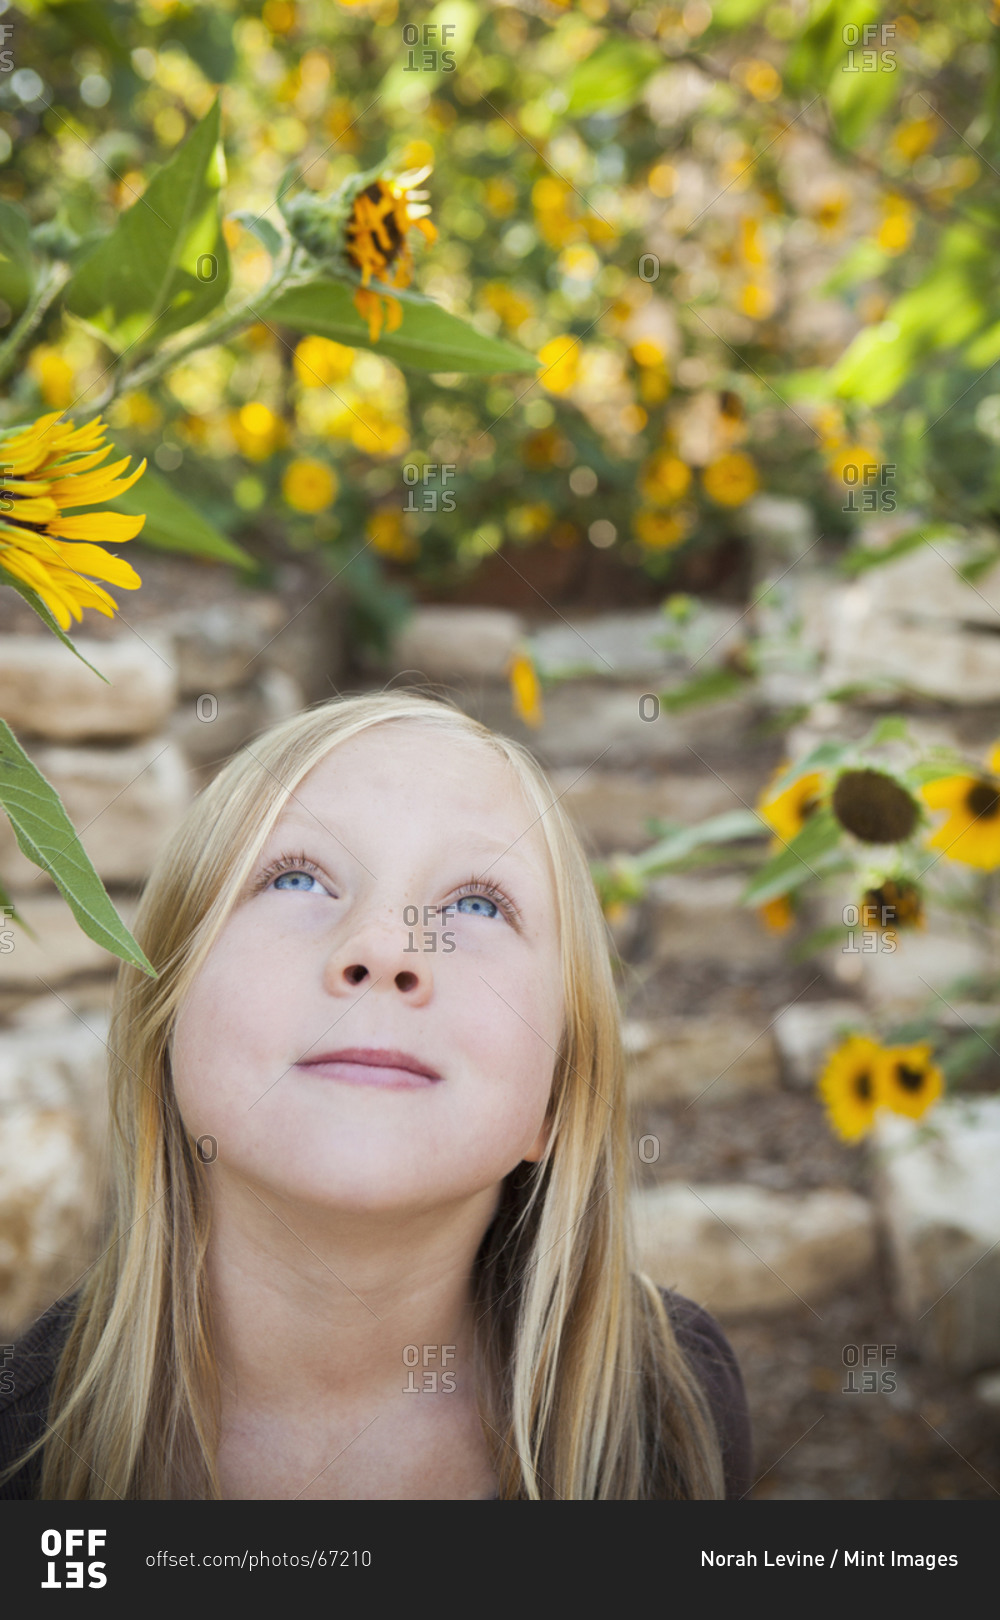 A child, a young girl looking up at a sunflower in a flower garden